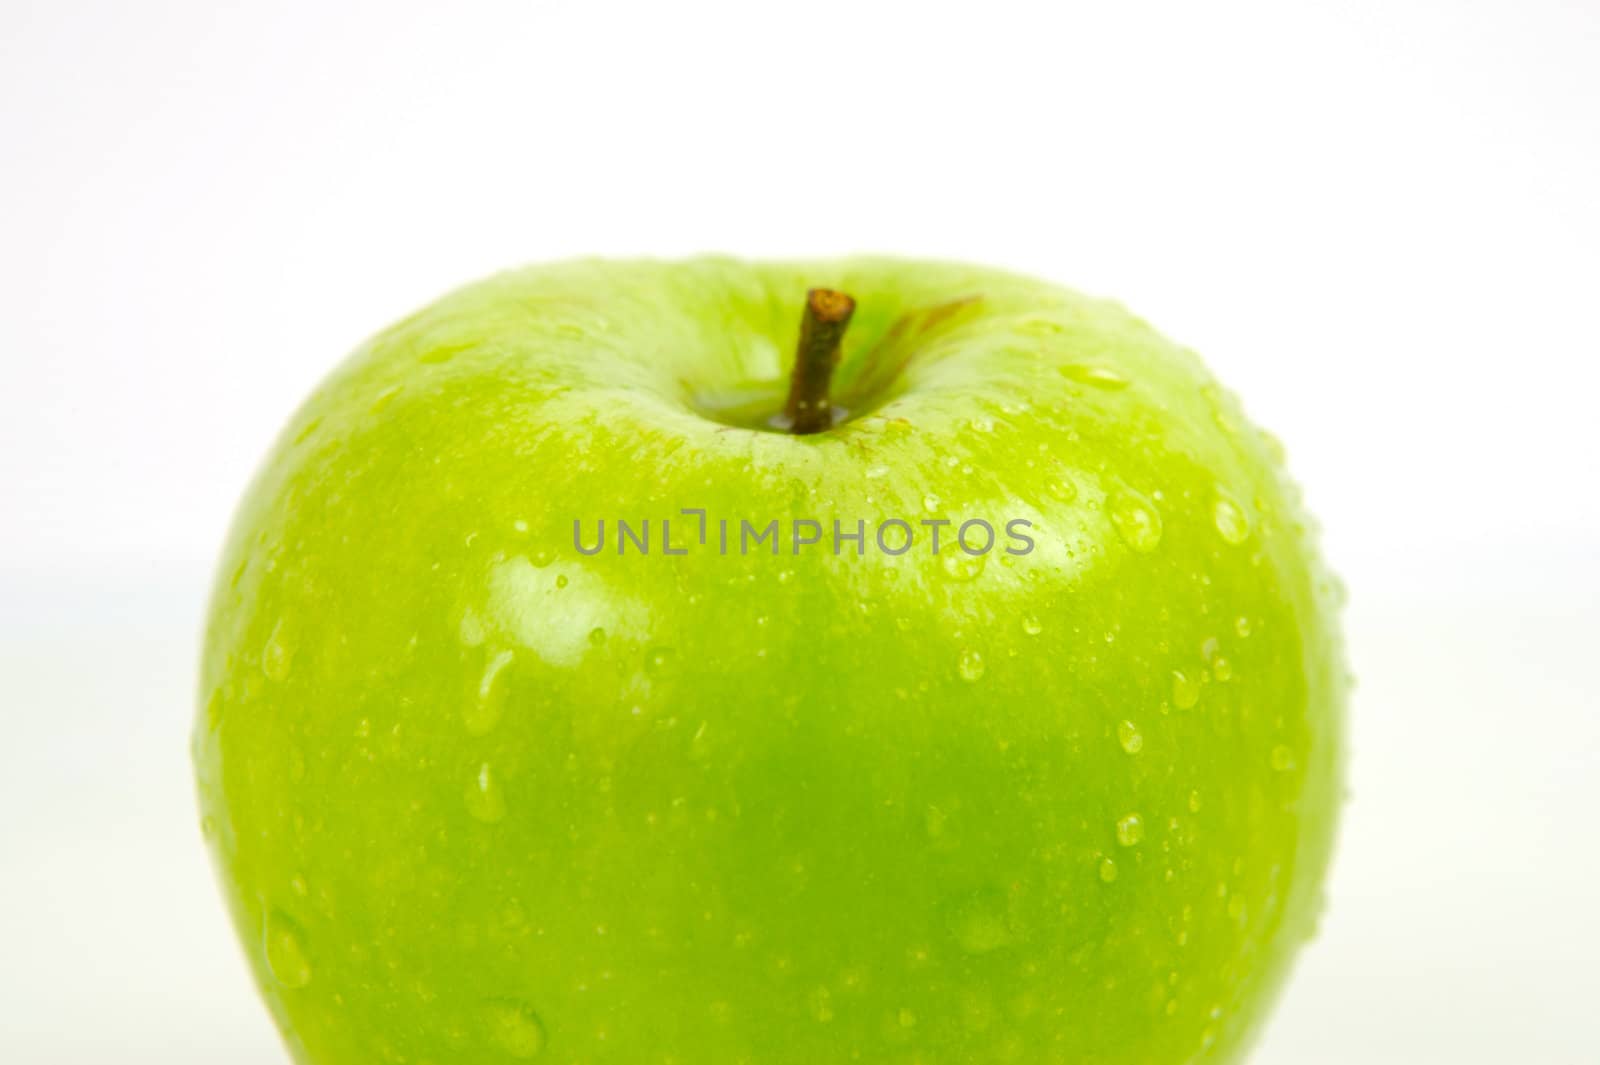 Green Apples by Kitch